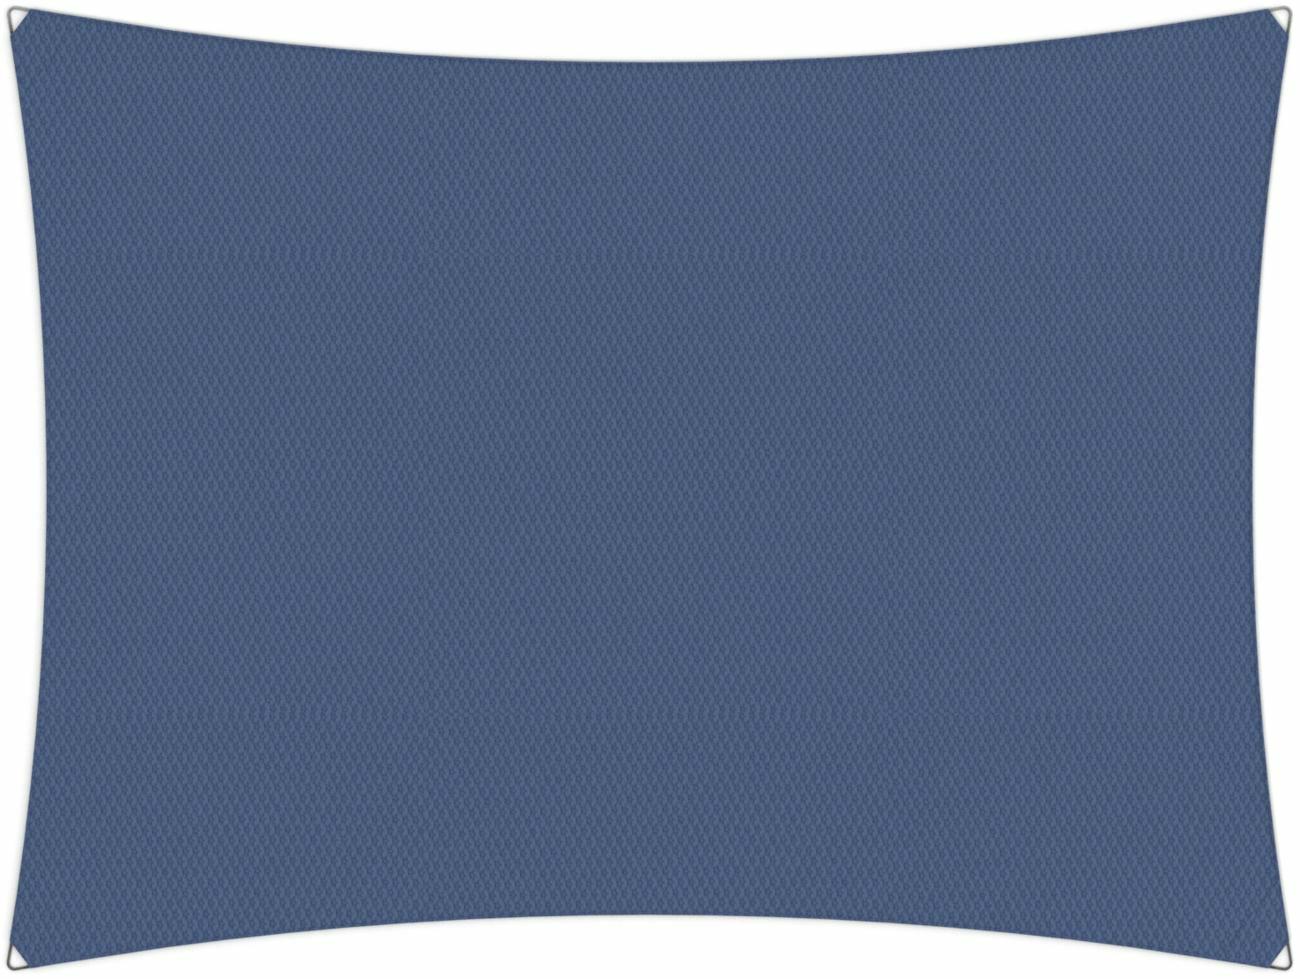 Ingenua shade sail Rectangle 5 x 3 m, for outdoor use. Colour of the fabric shade sail Blue Storm.